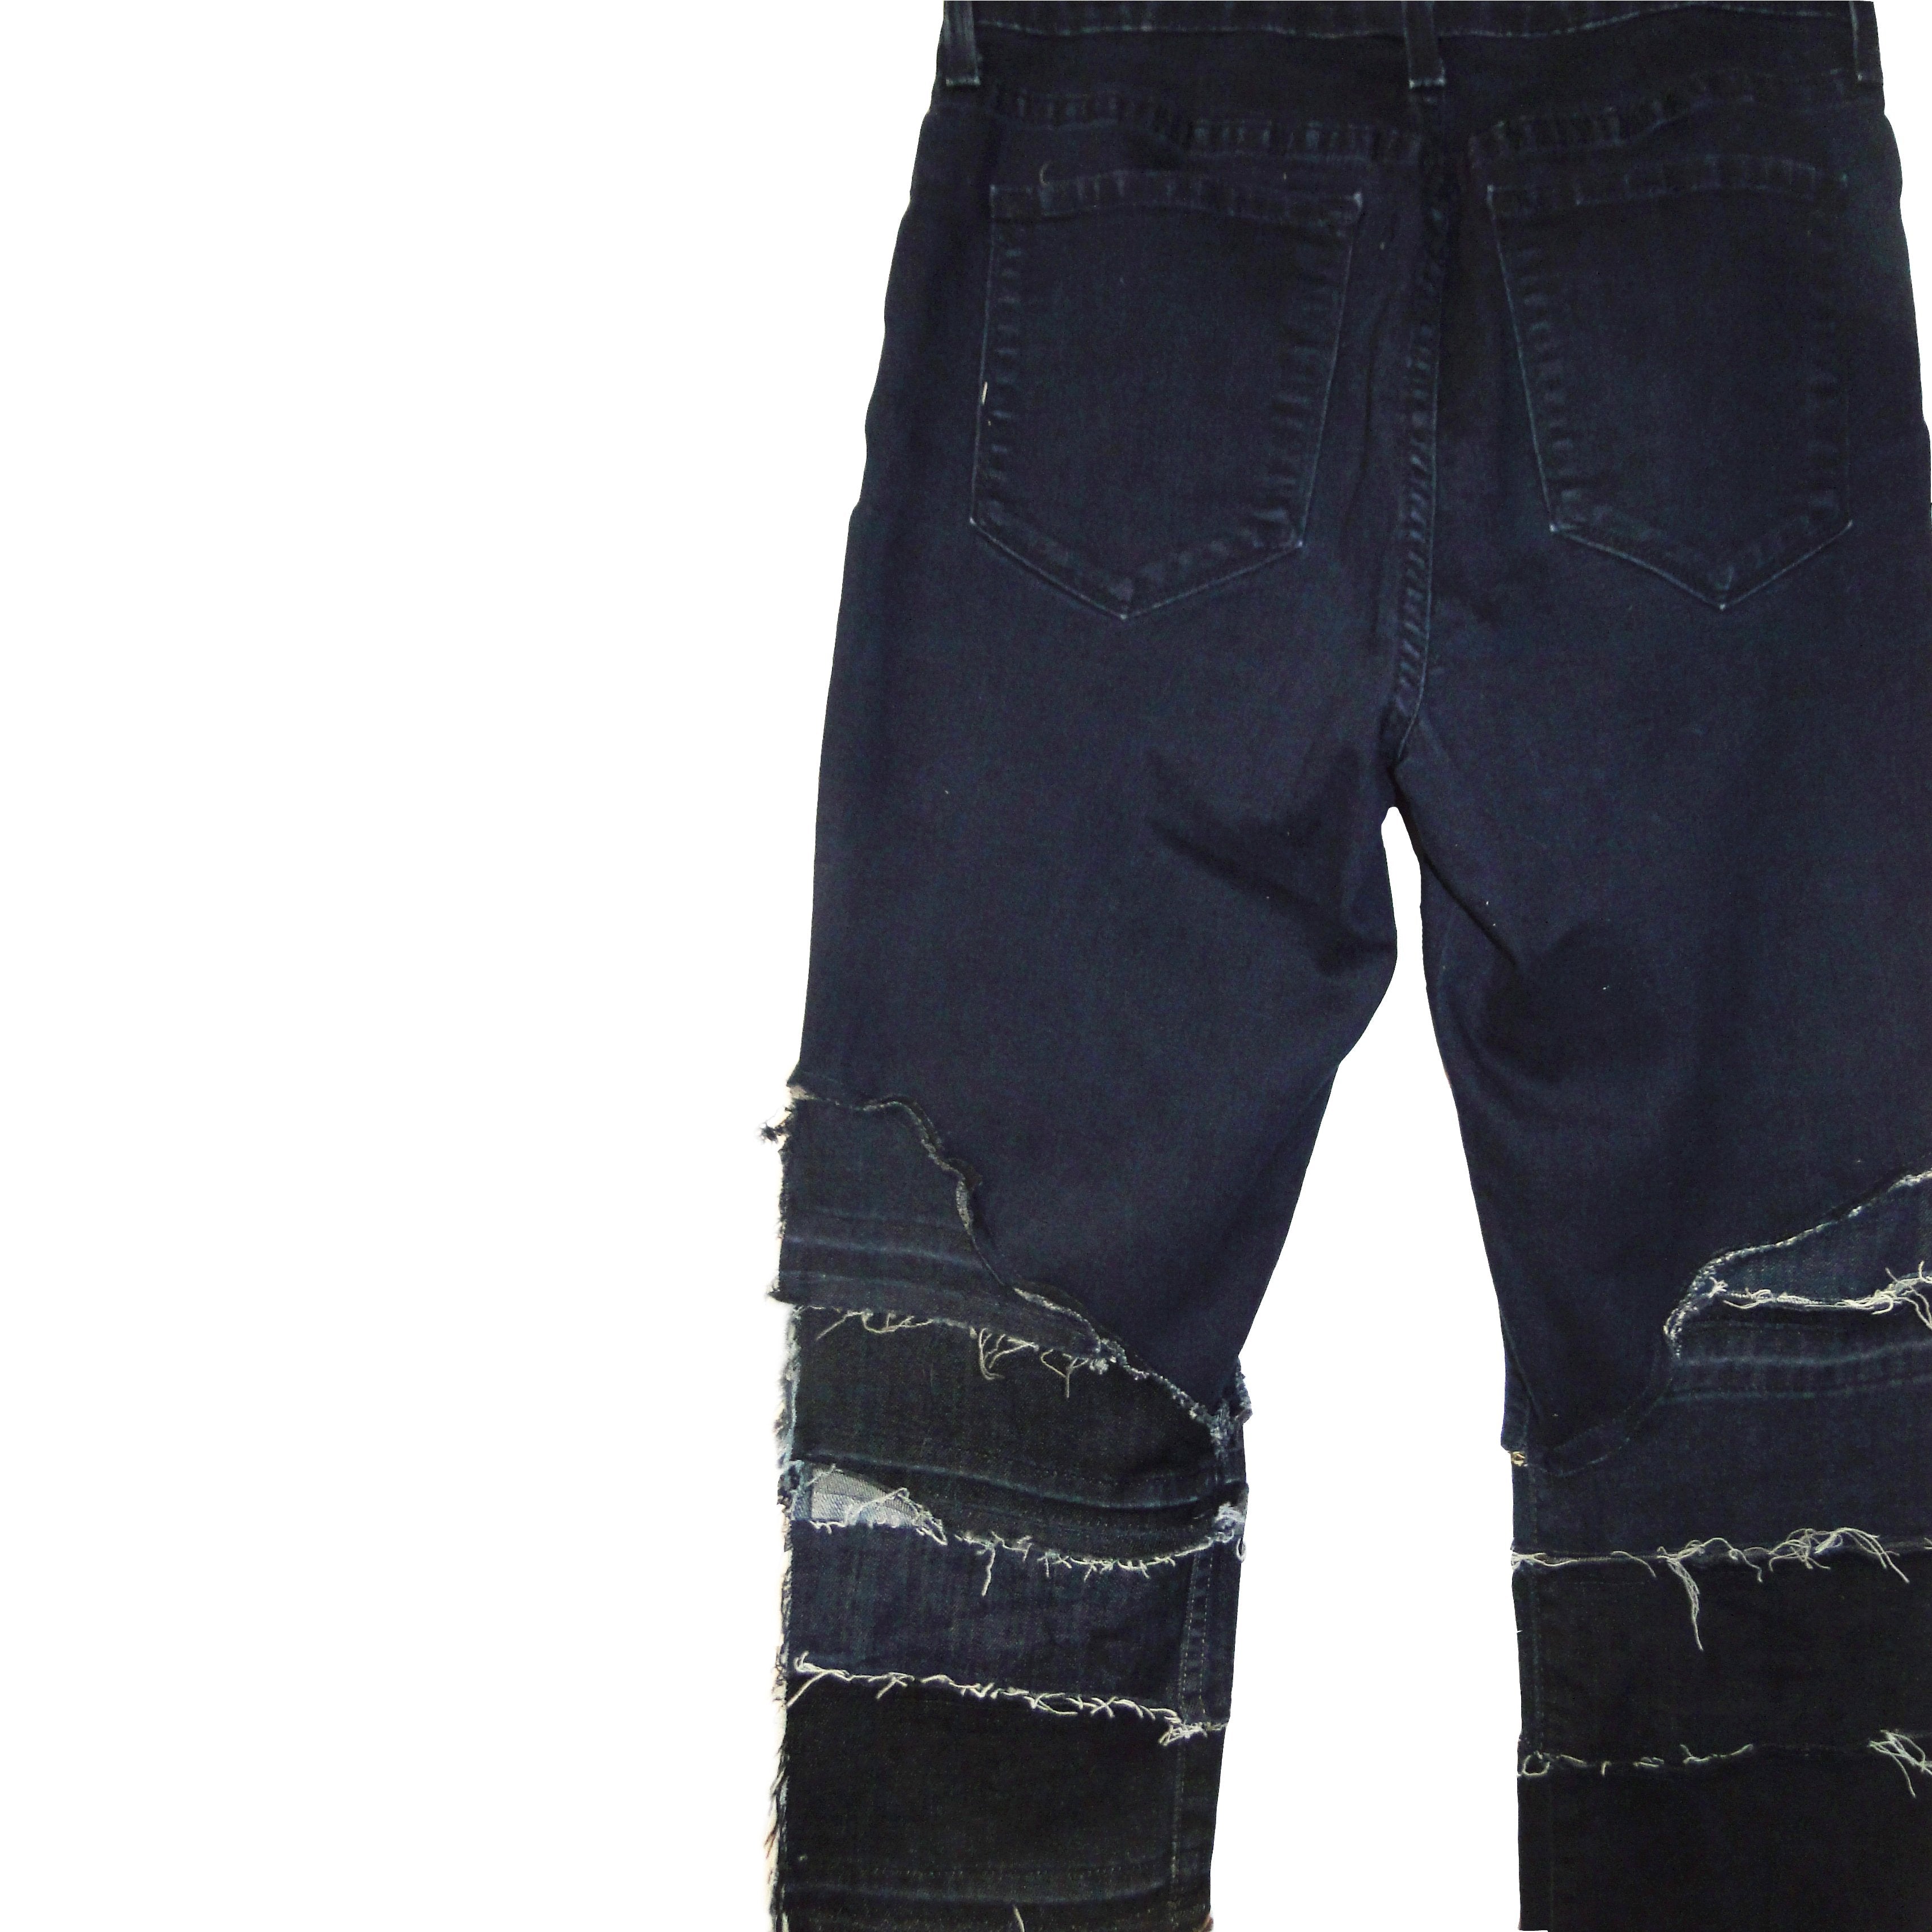 #REMIXbyStevieLeigh upcycled moto blue jeans